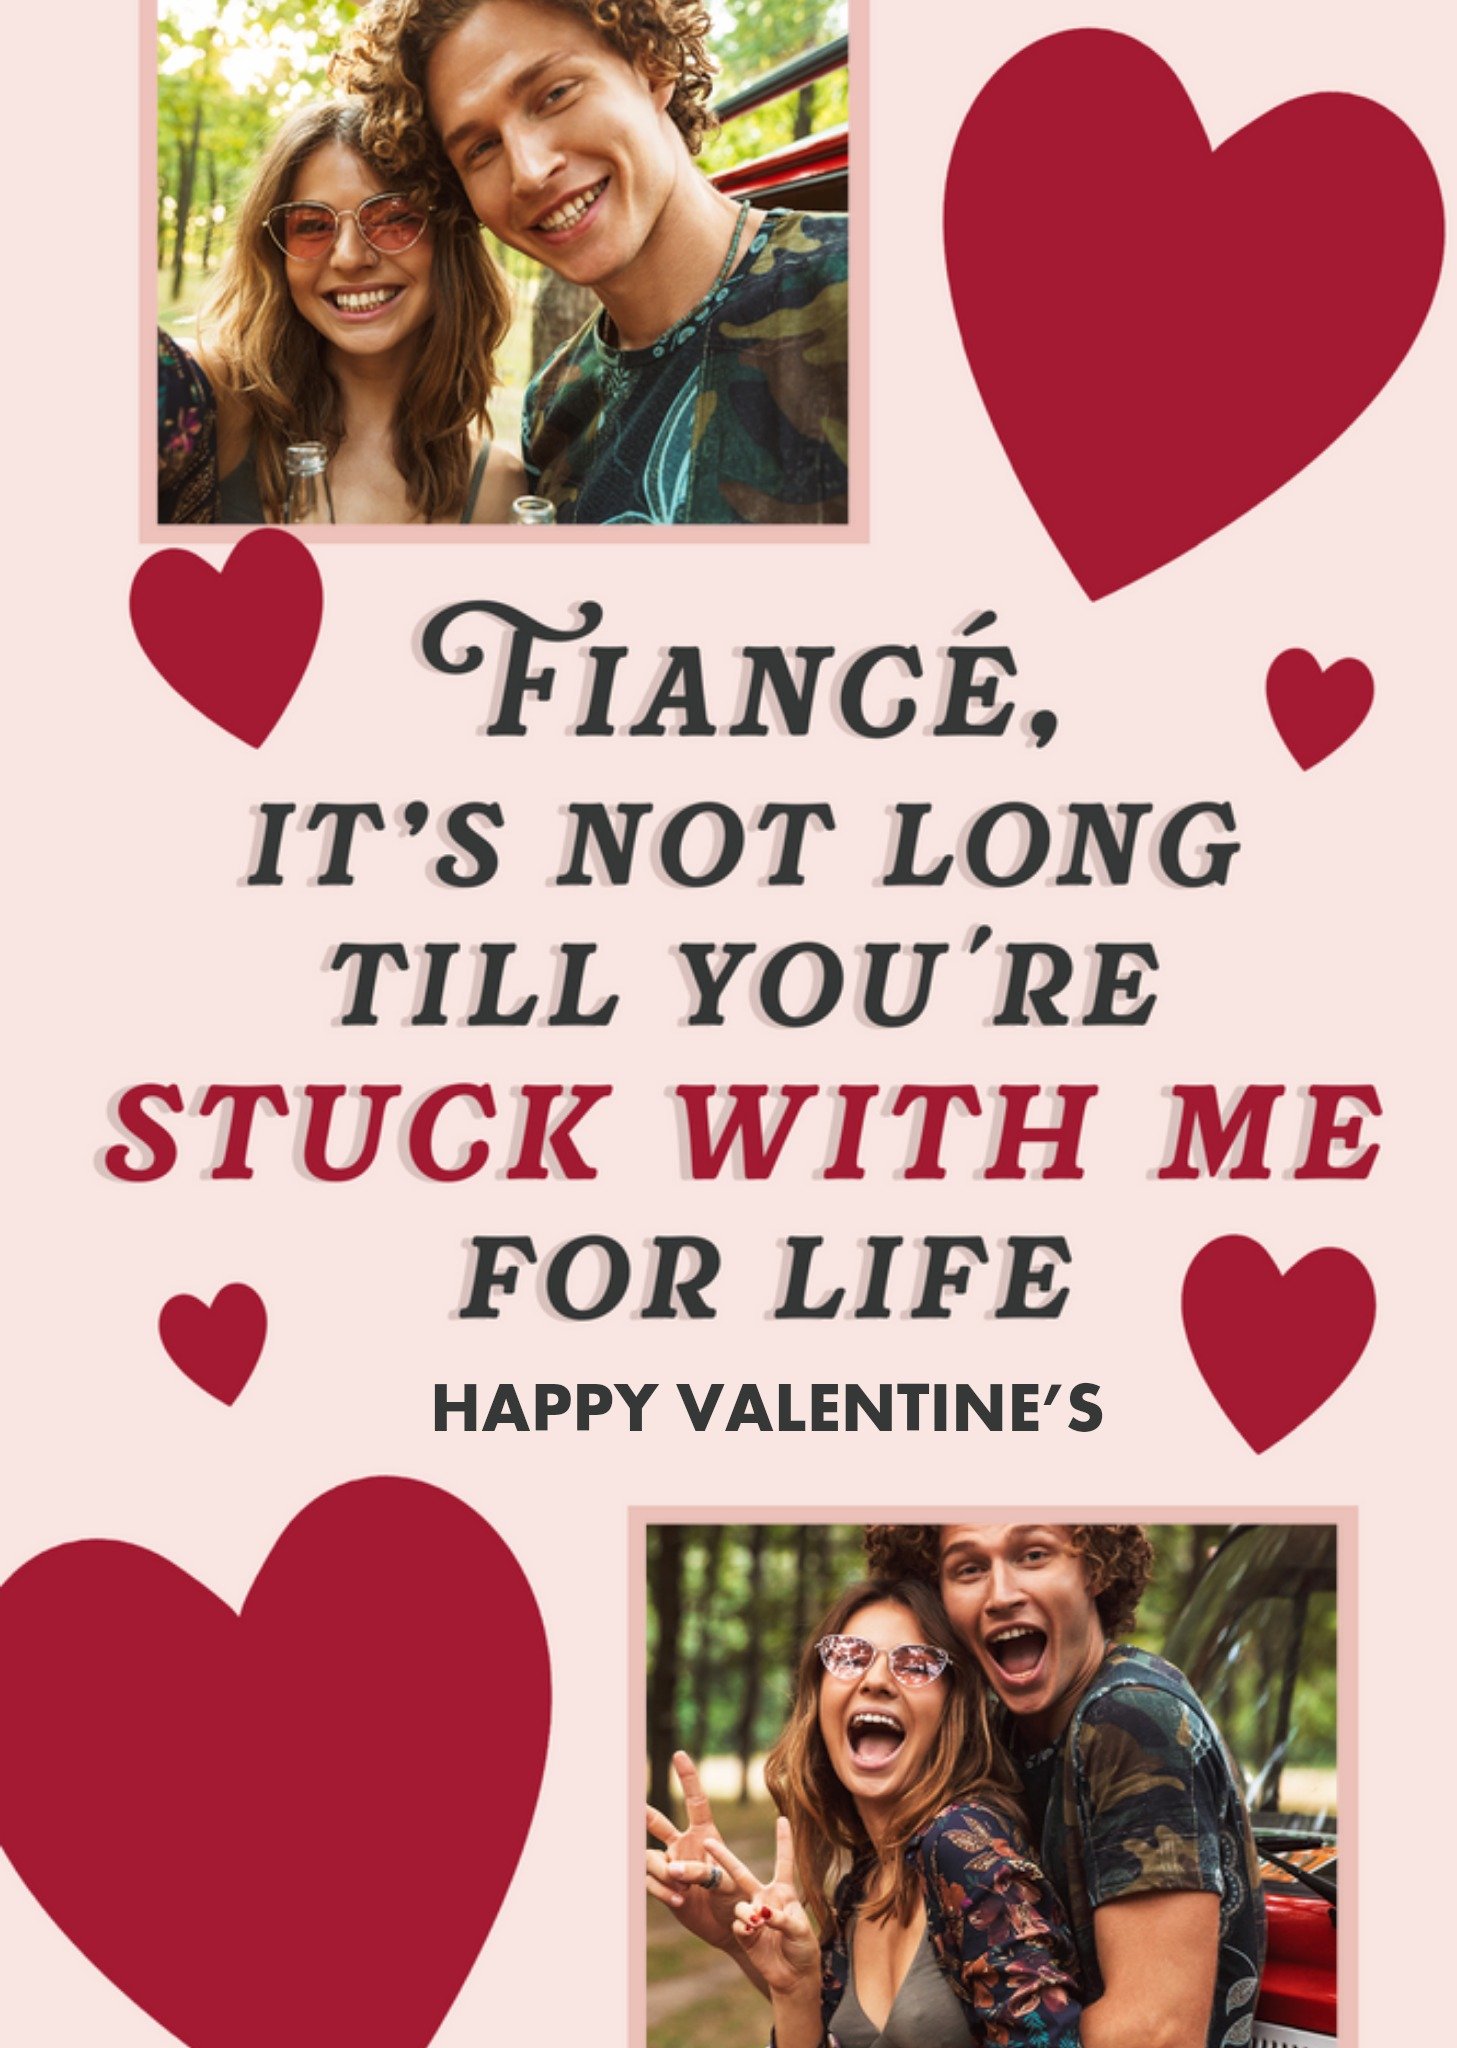 Moonpig Fiance Not Long Till You're Stuck With Me For Life Typography Photo Upload Valentine's Day C